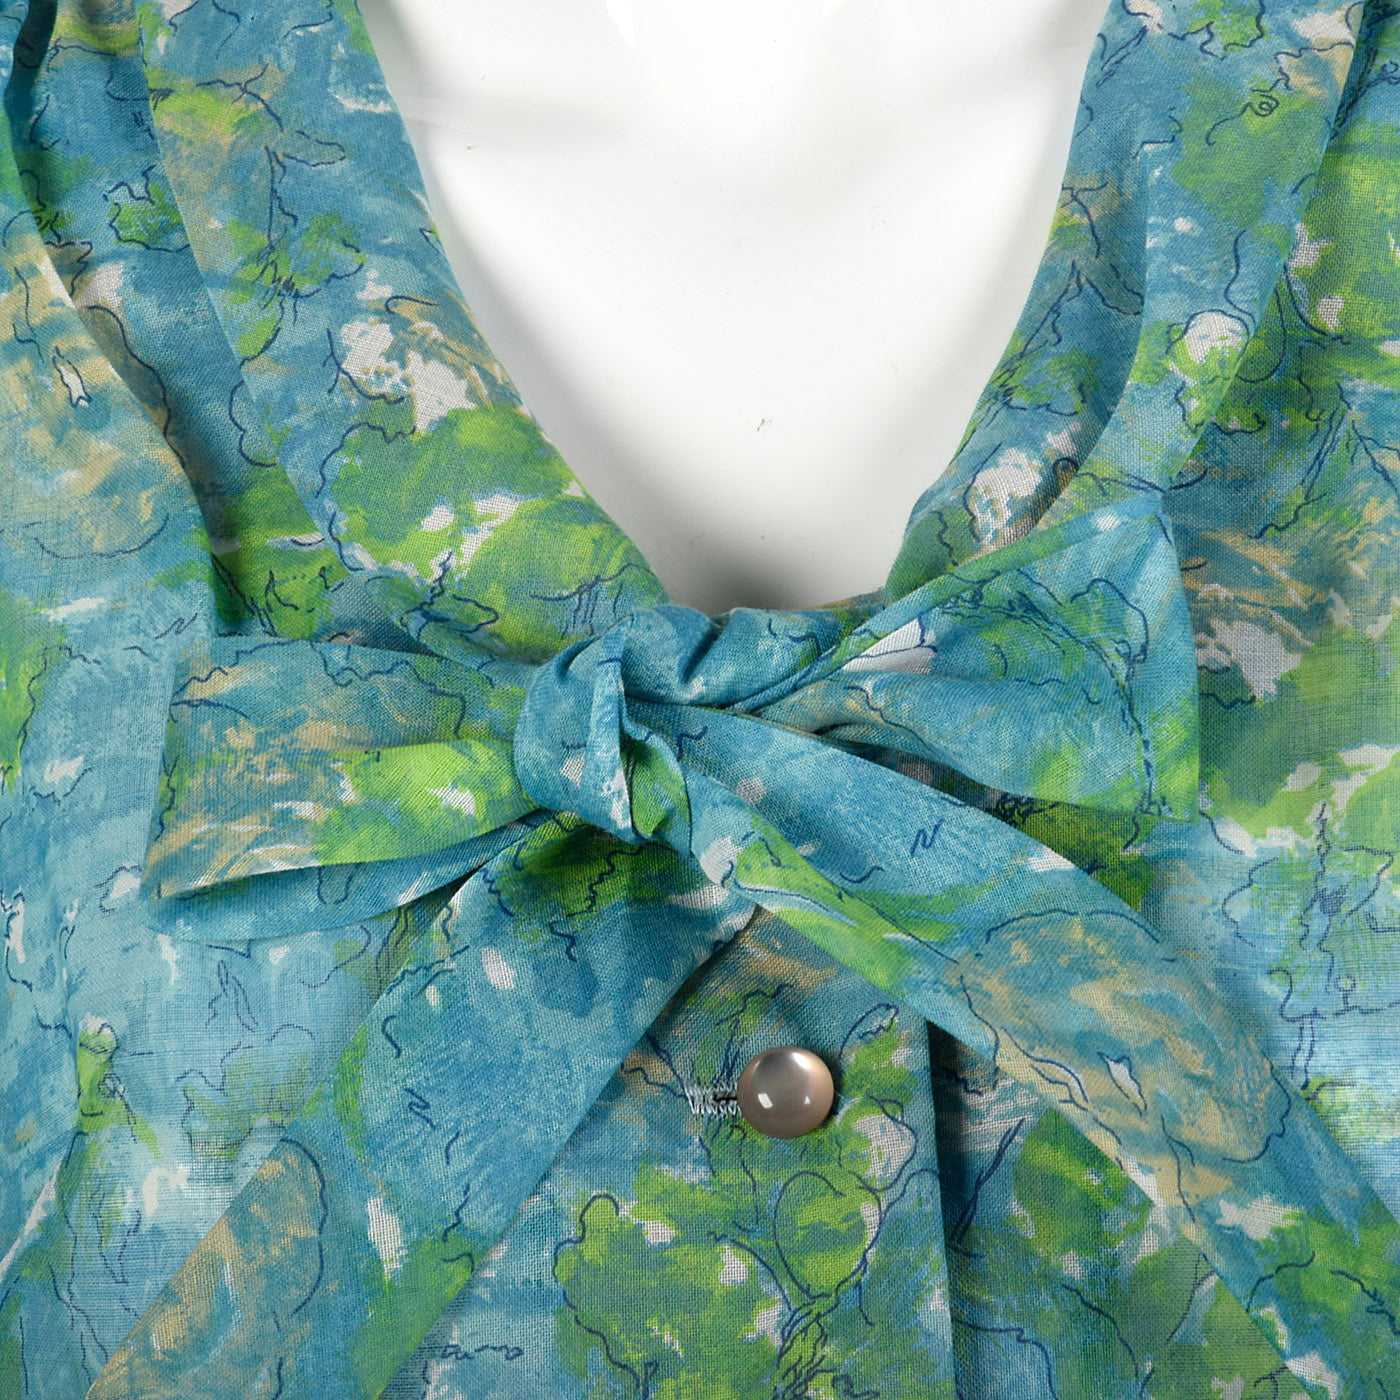 1950s Blue Floral Print Dress with Pleated Skirt